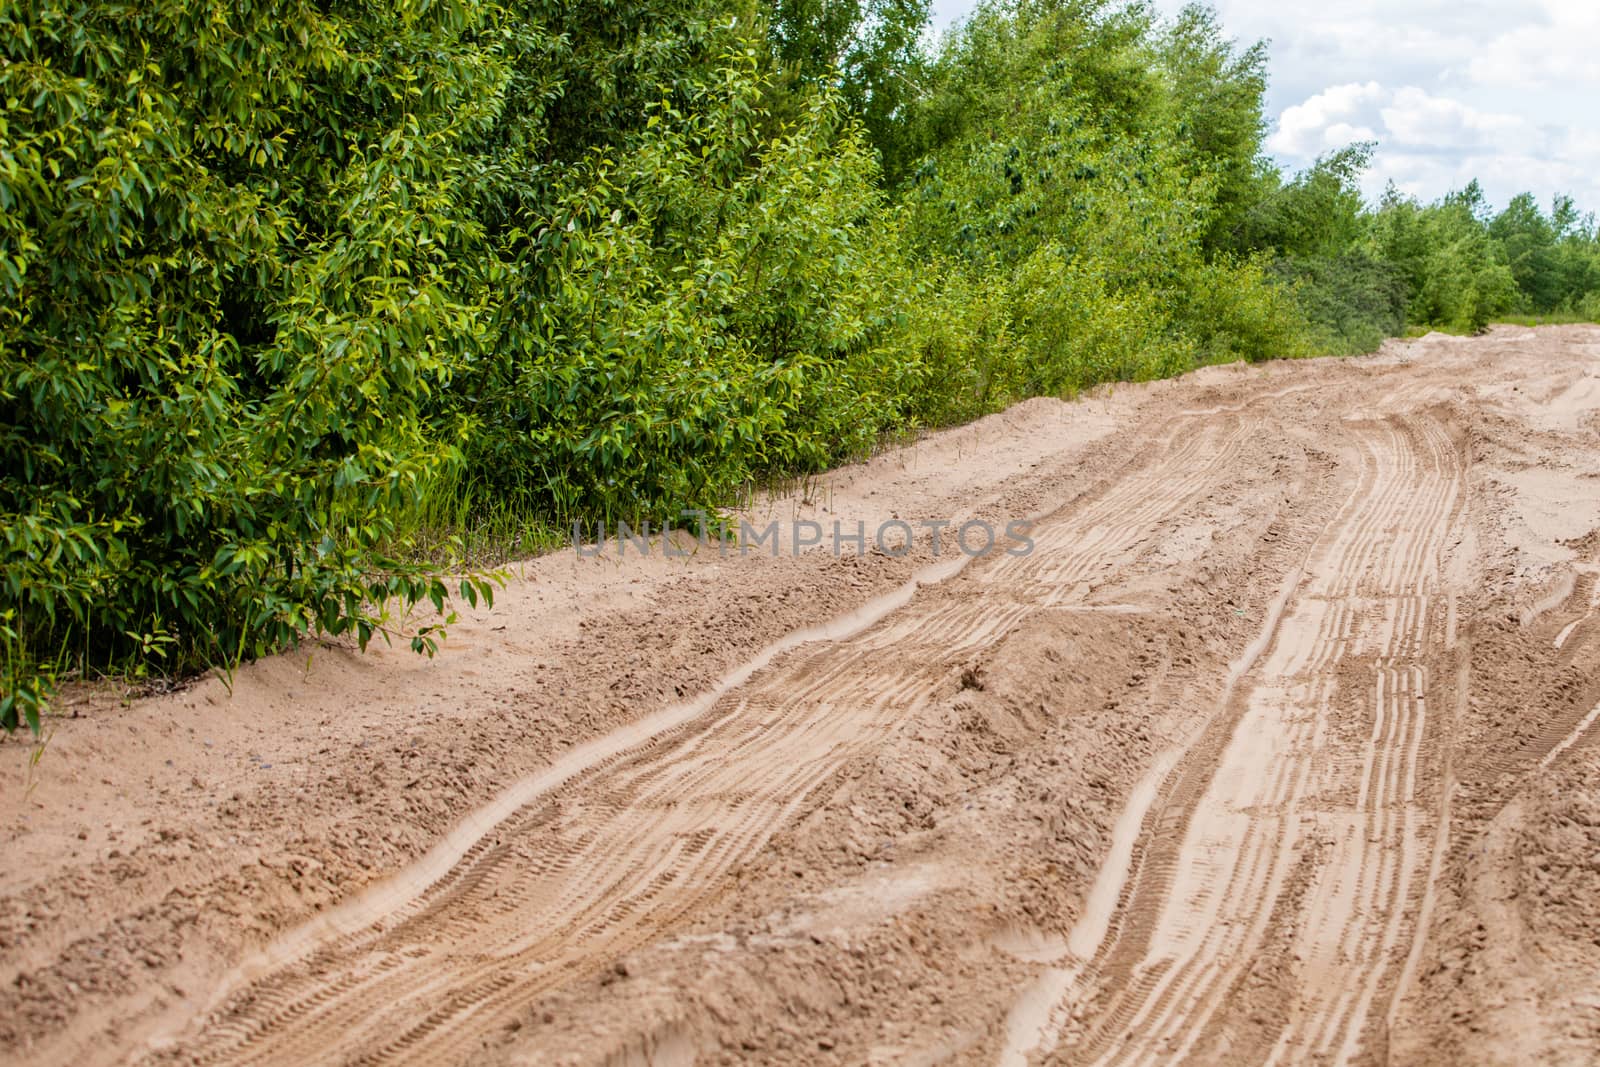 Off road 4X4 wheel tracks on country desert beach road sand motoring background image